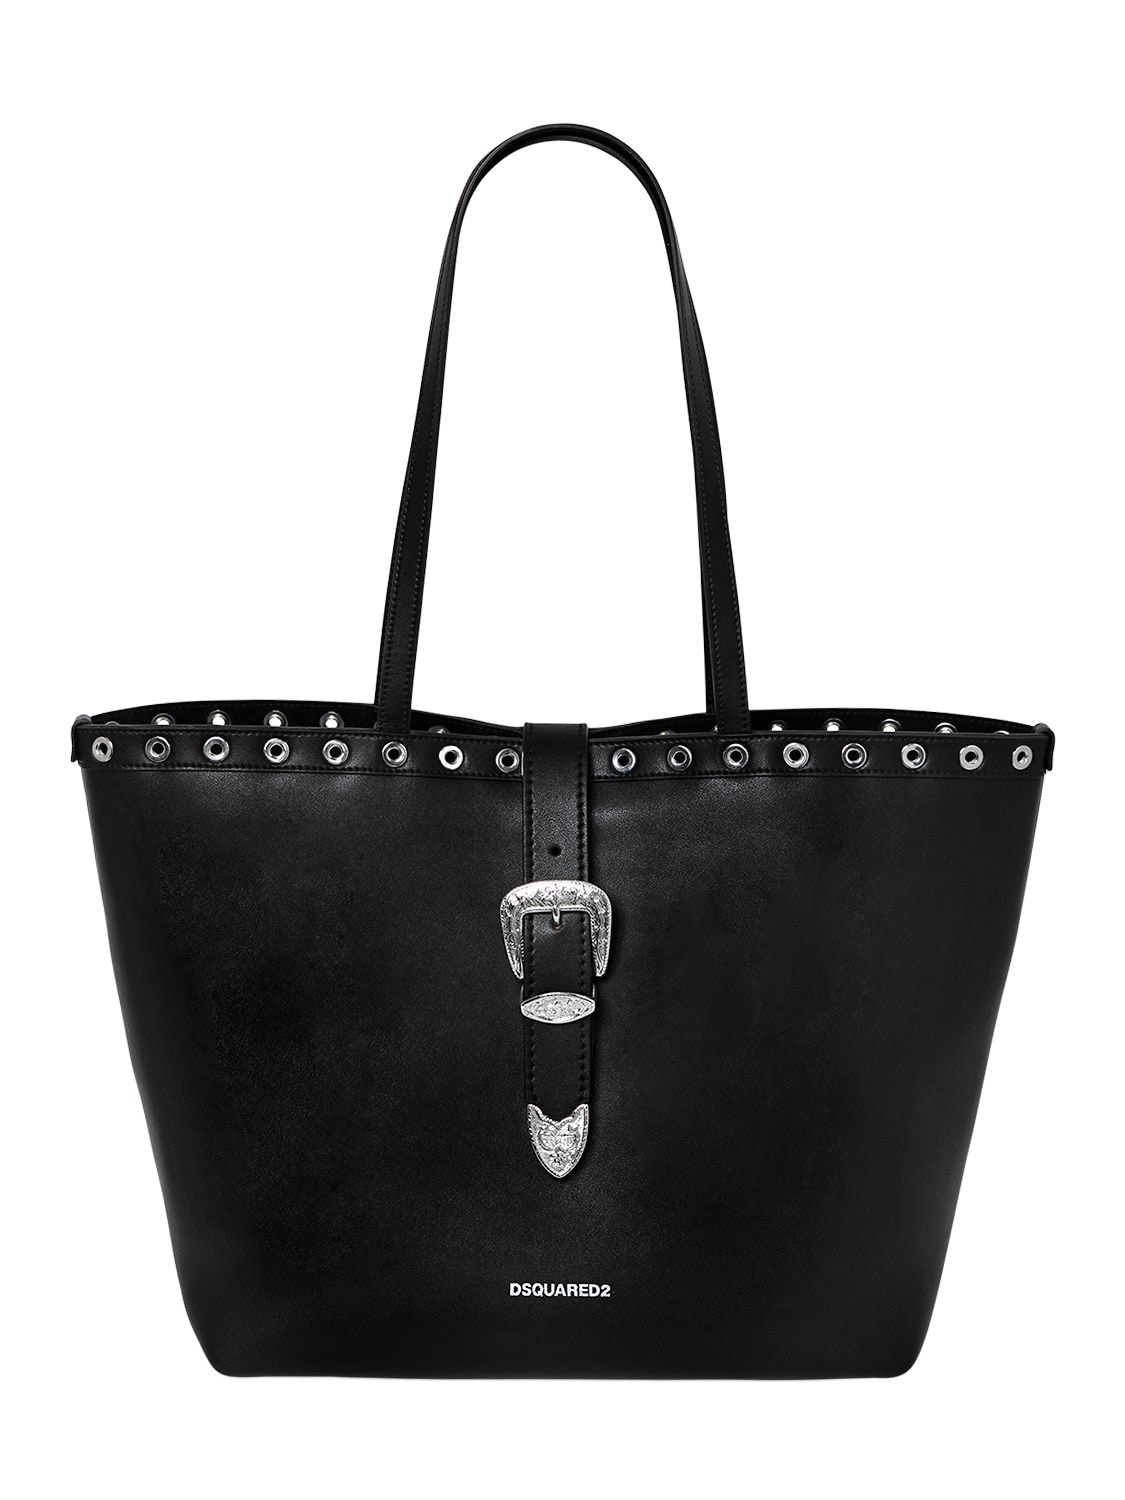 Dsquared2 Faux Leather Tote Bag W/ Buckle In Black